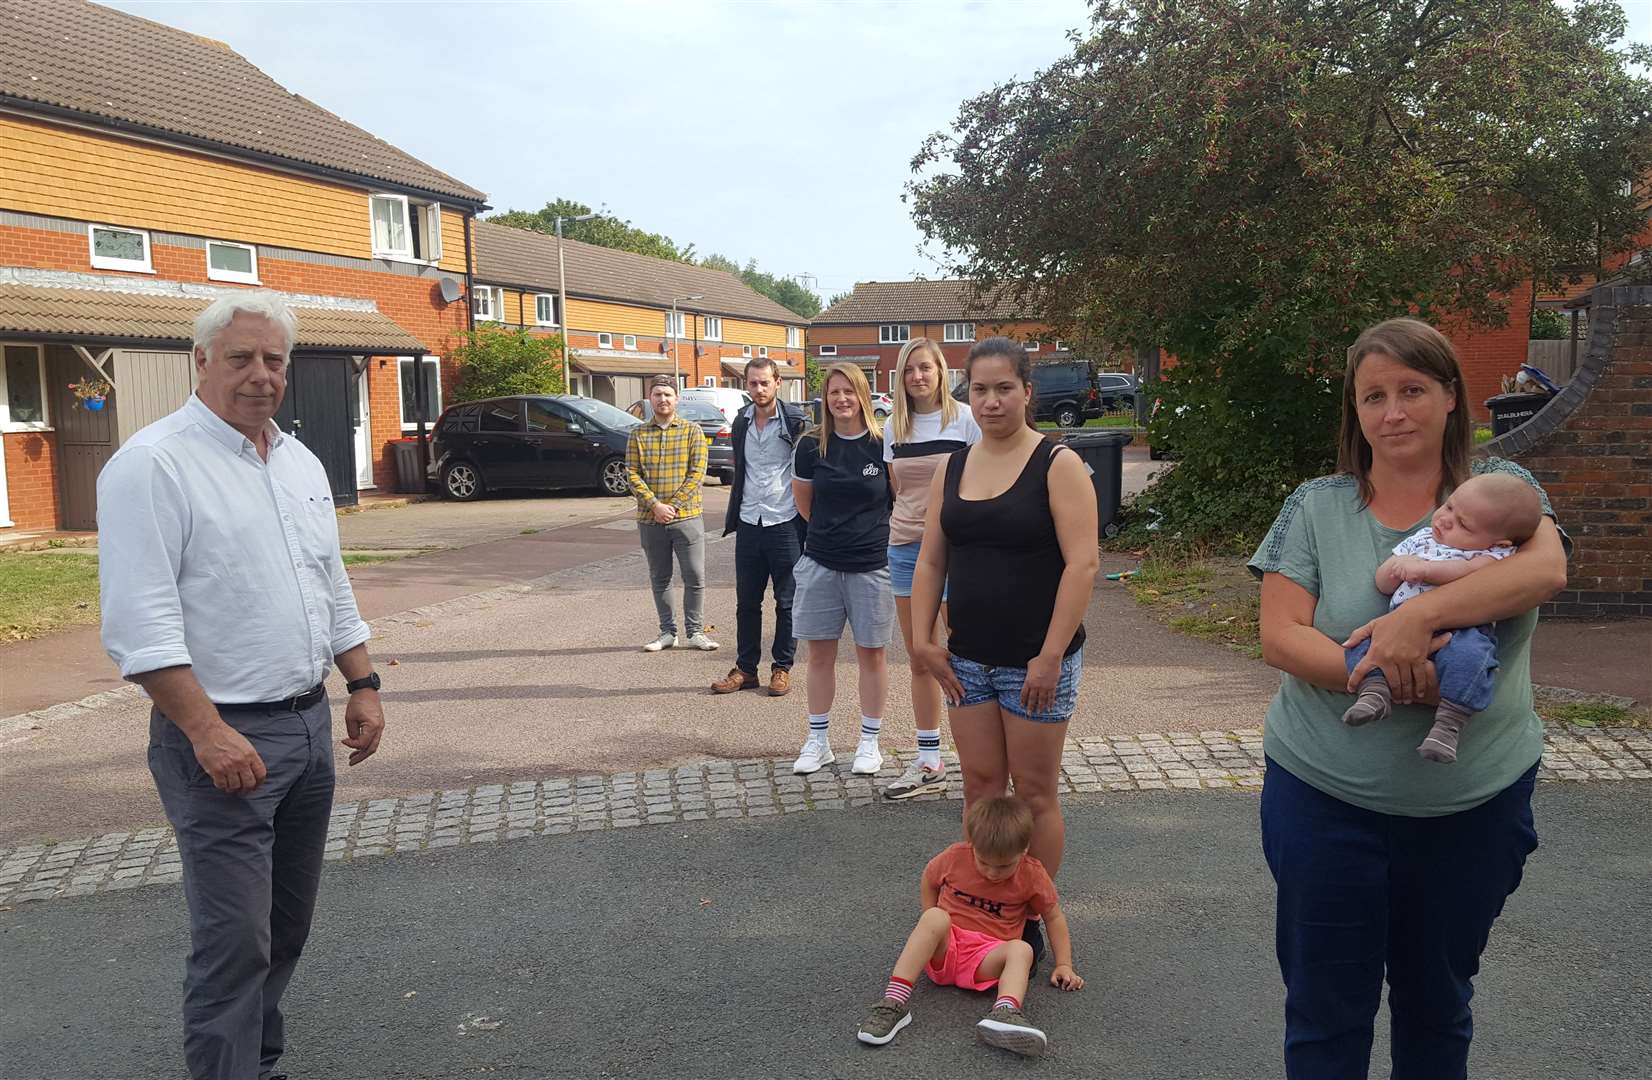 Cllr Dave Wilson (left) with families facing eviction